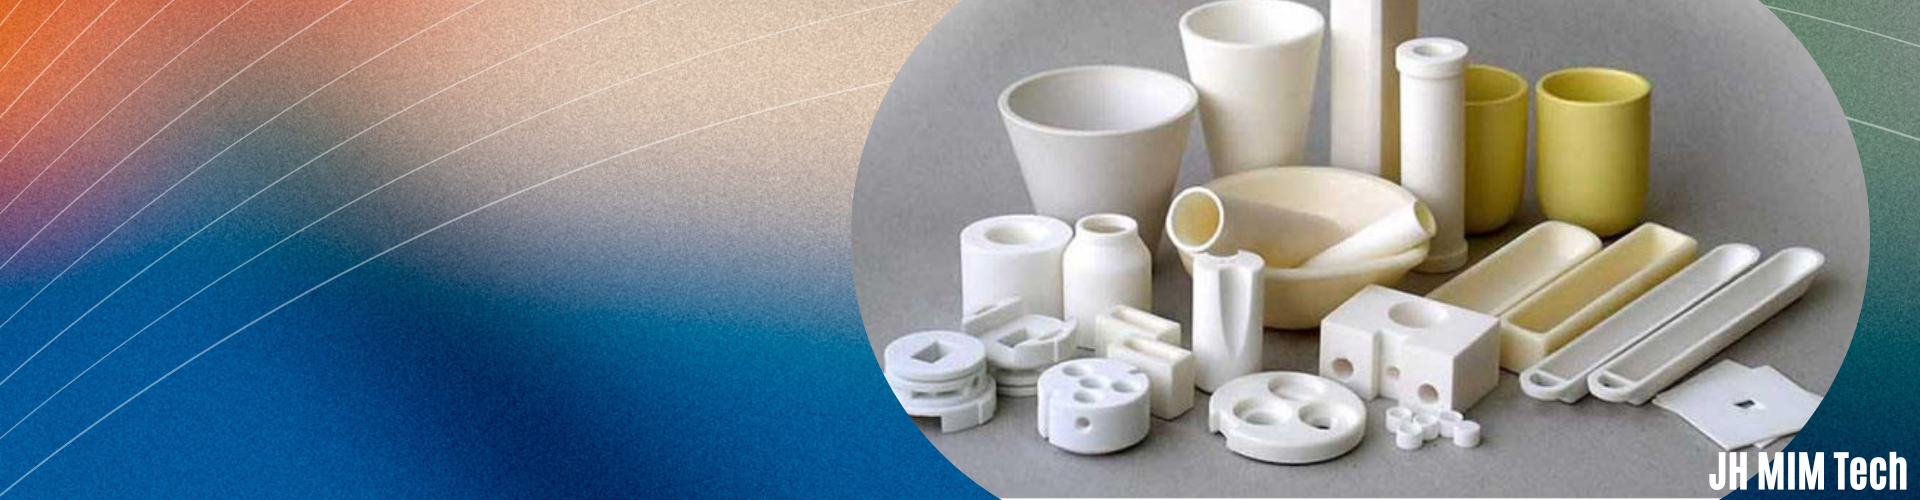 ceramic injection molding materials